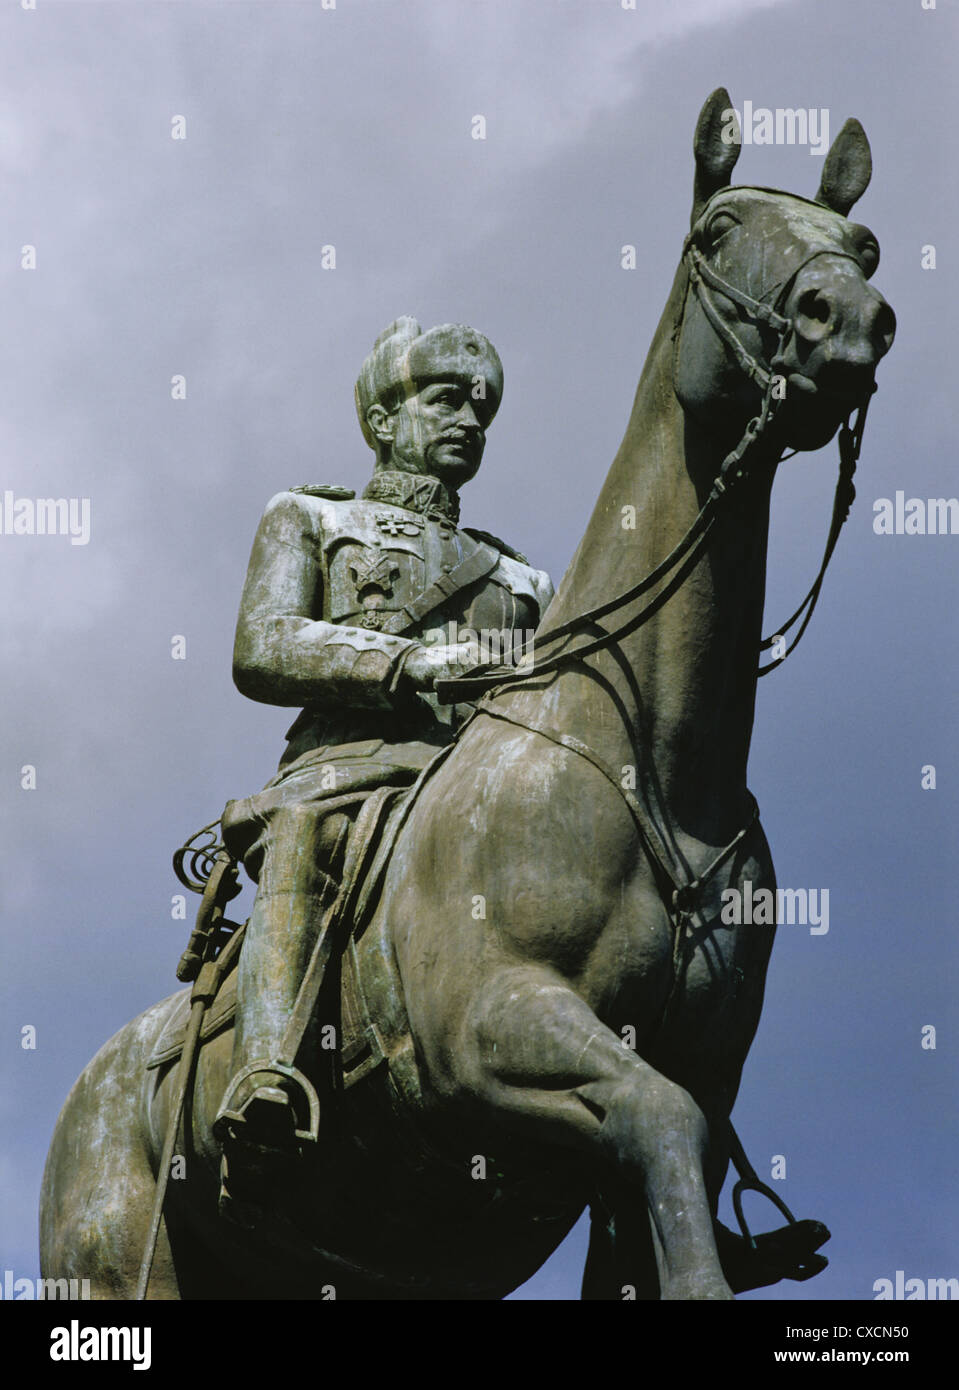 The 1960 equestrian statue of General Carl Gustaf Emil Mannerheim by Aimo Tukiainen in Helsinki, Finland Stock Photo